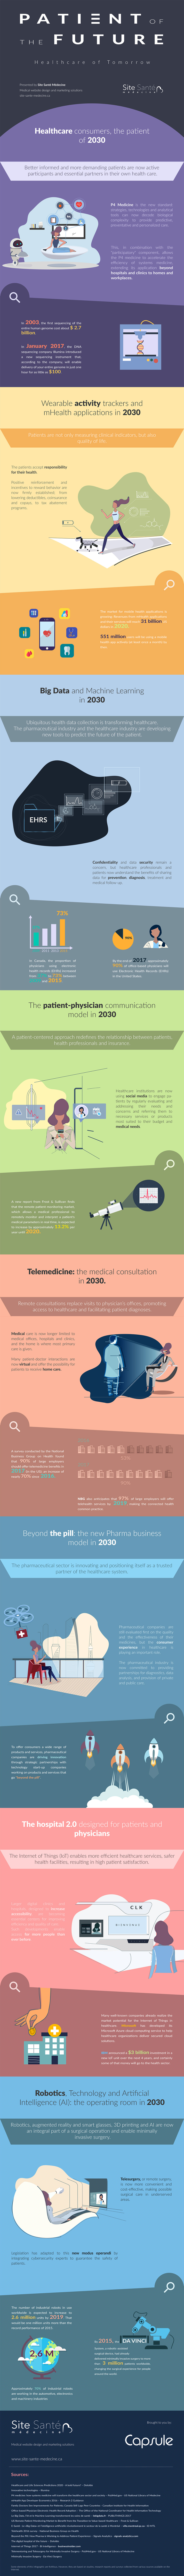 Infographic: Patient of the Future